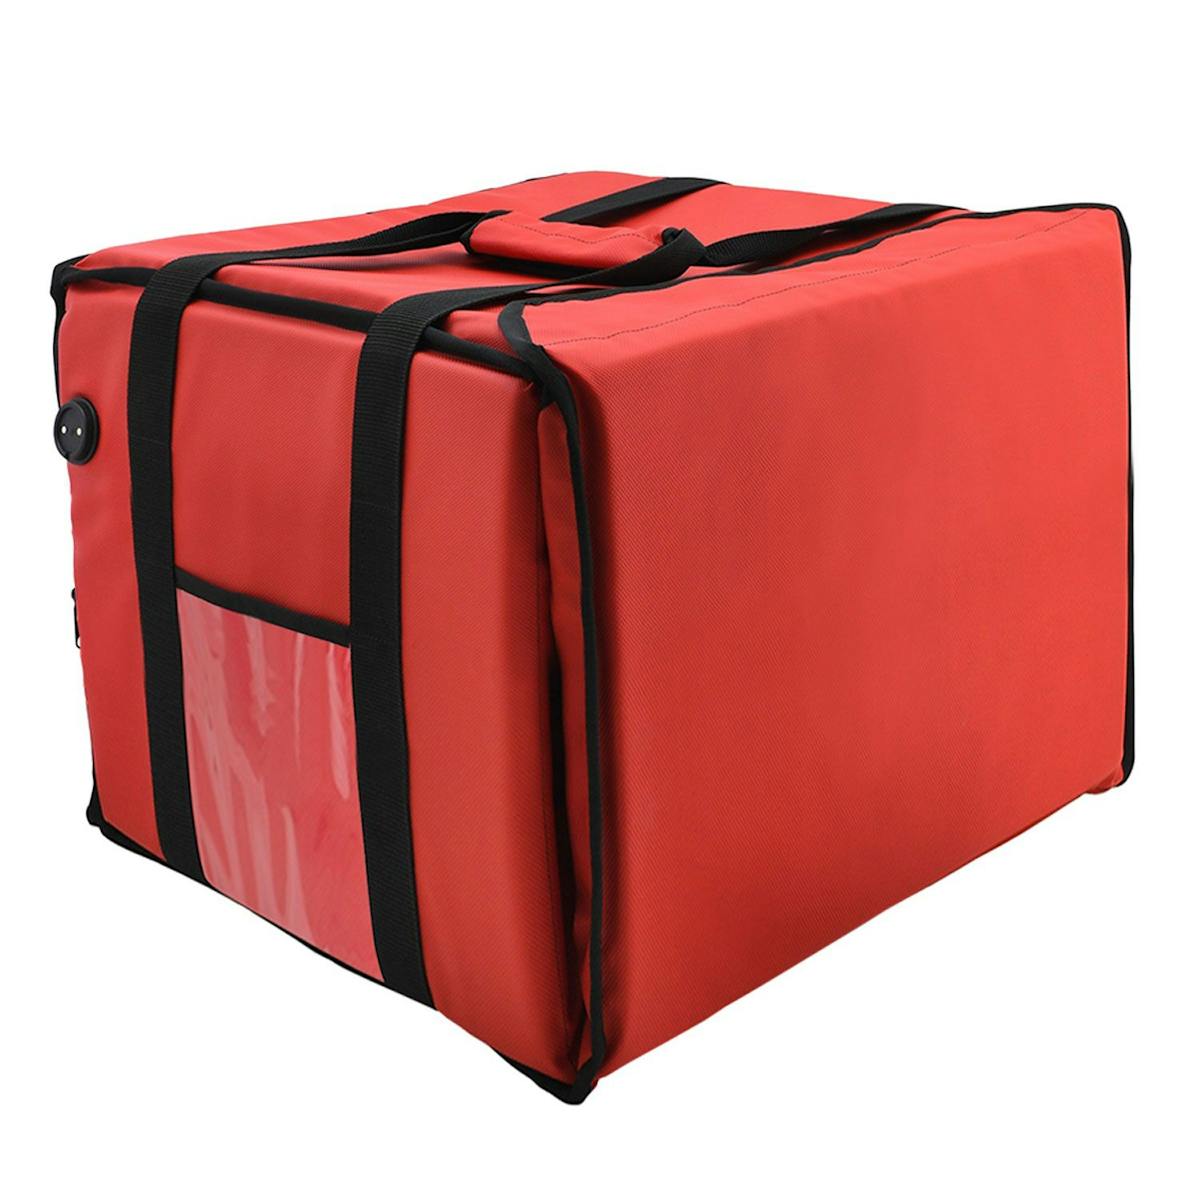 WarmBag/ Pizzabag PRO - Heated delivery bag - for 8 pizza boxes 35x35cm - Red